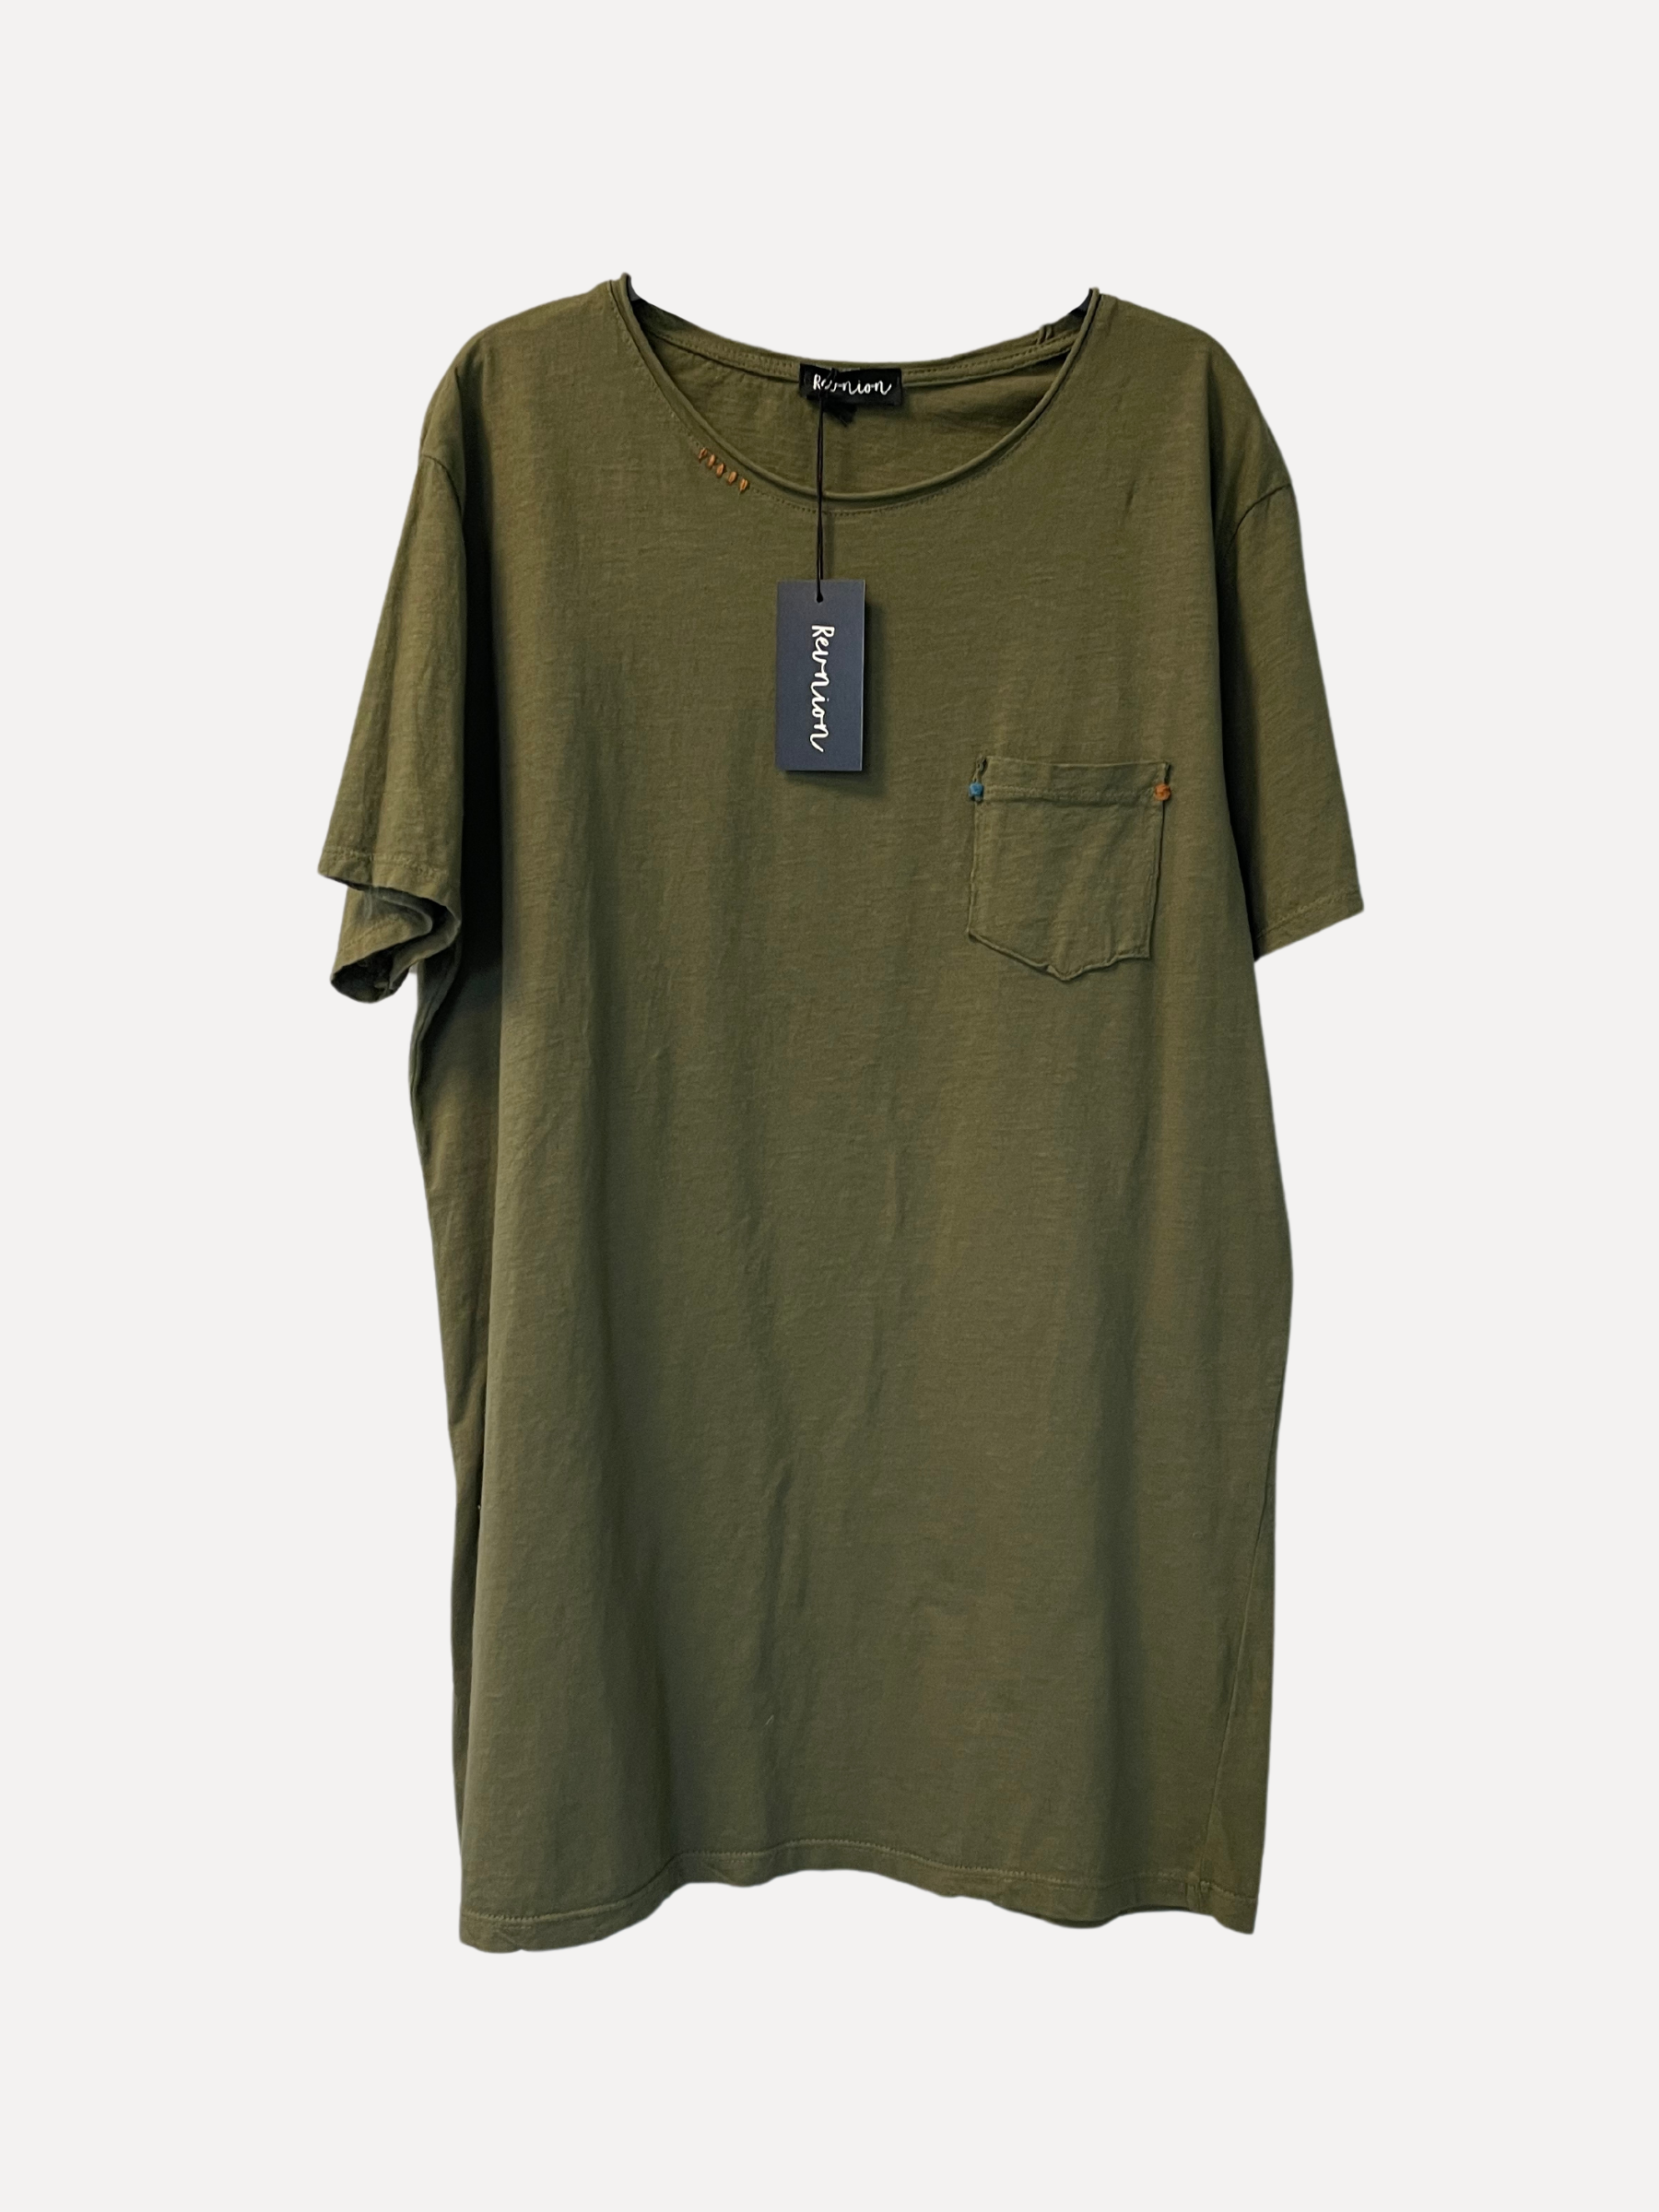 MIKE T-Shirt, Army / 4-Pack